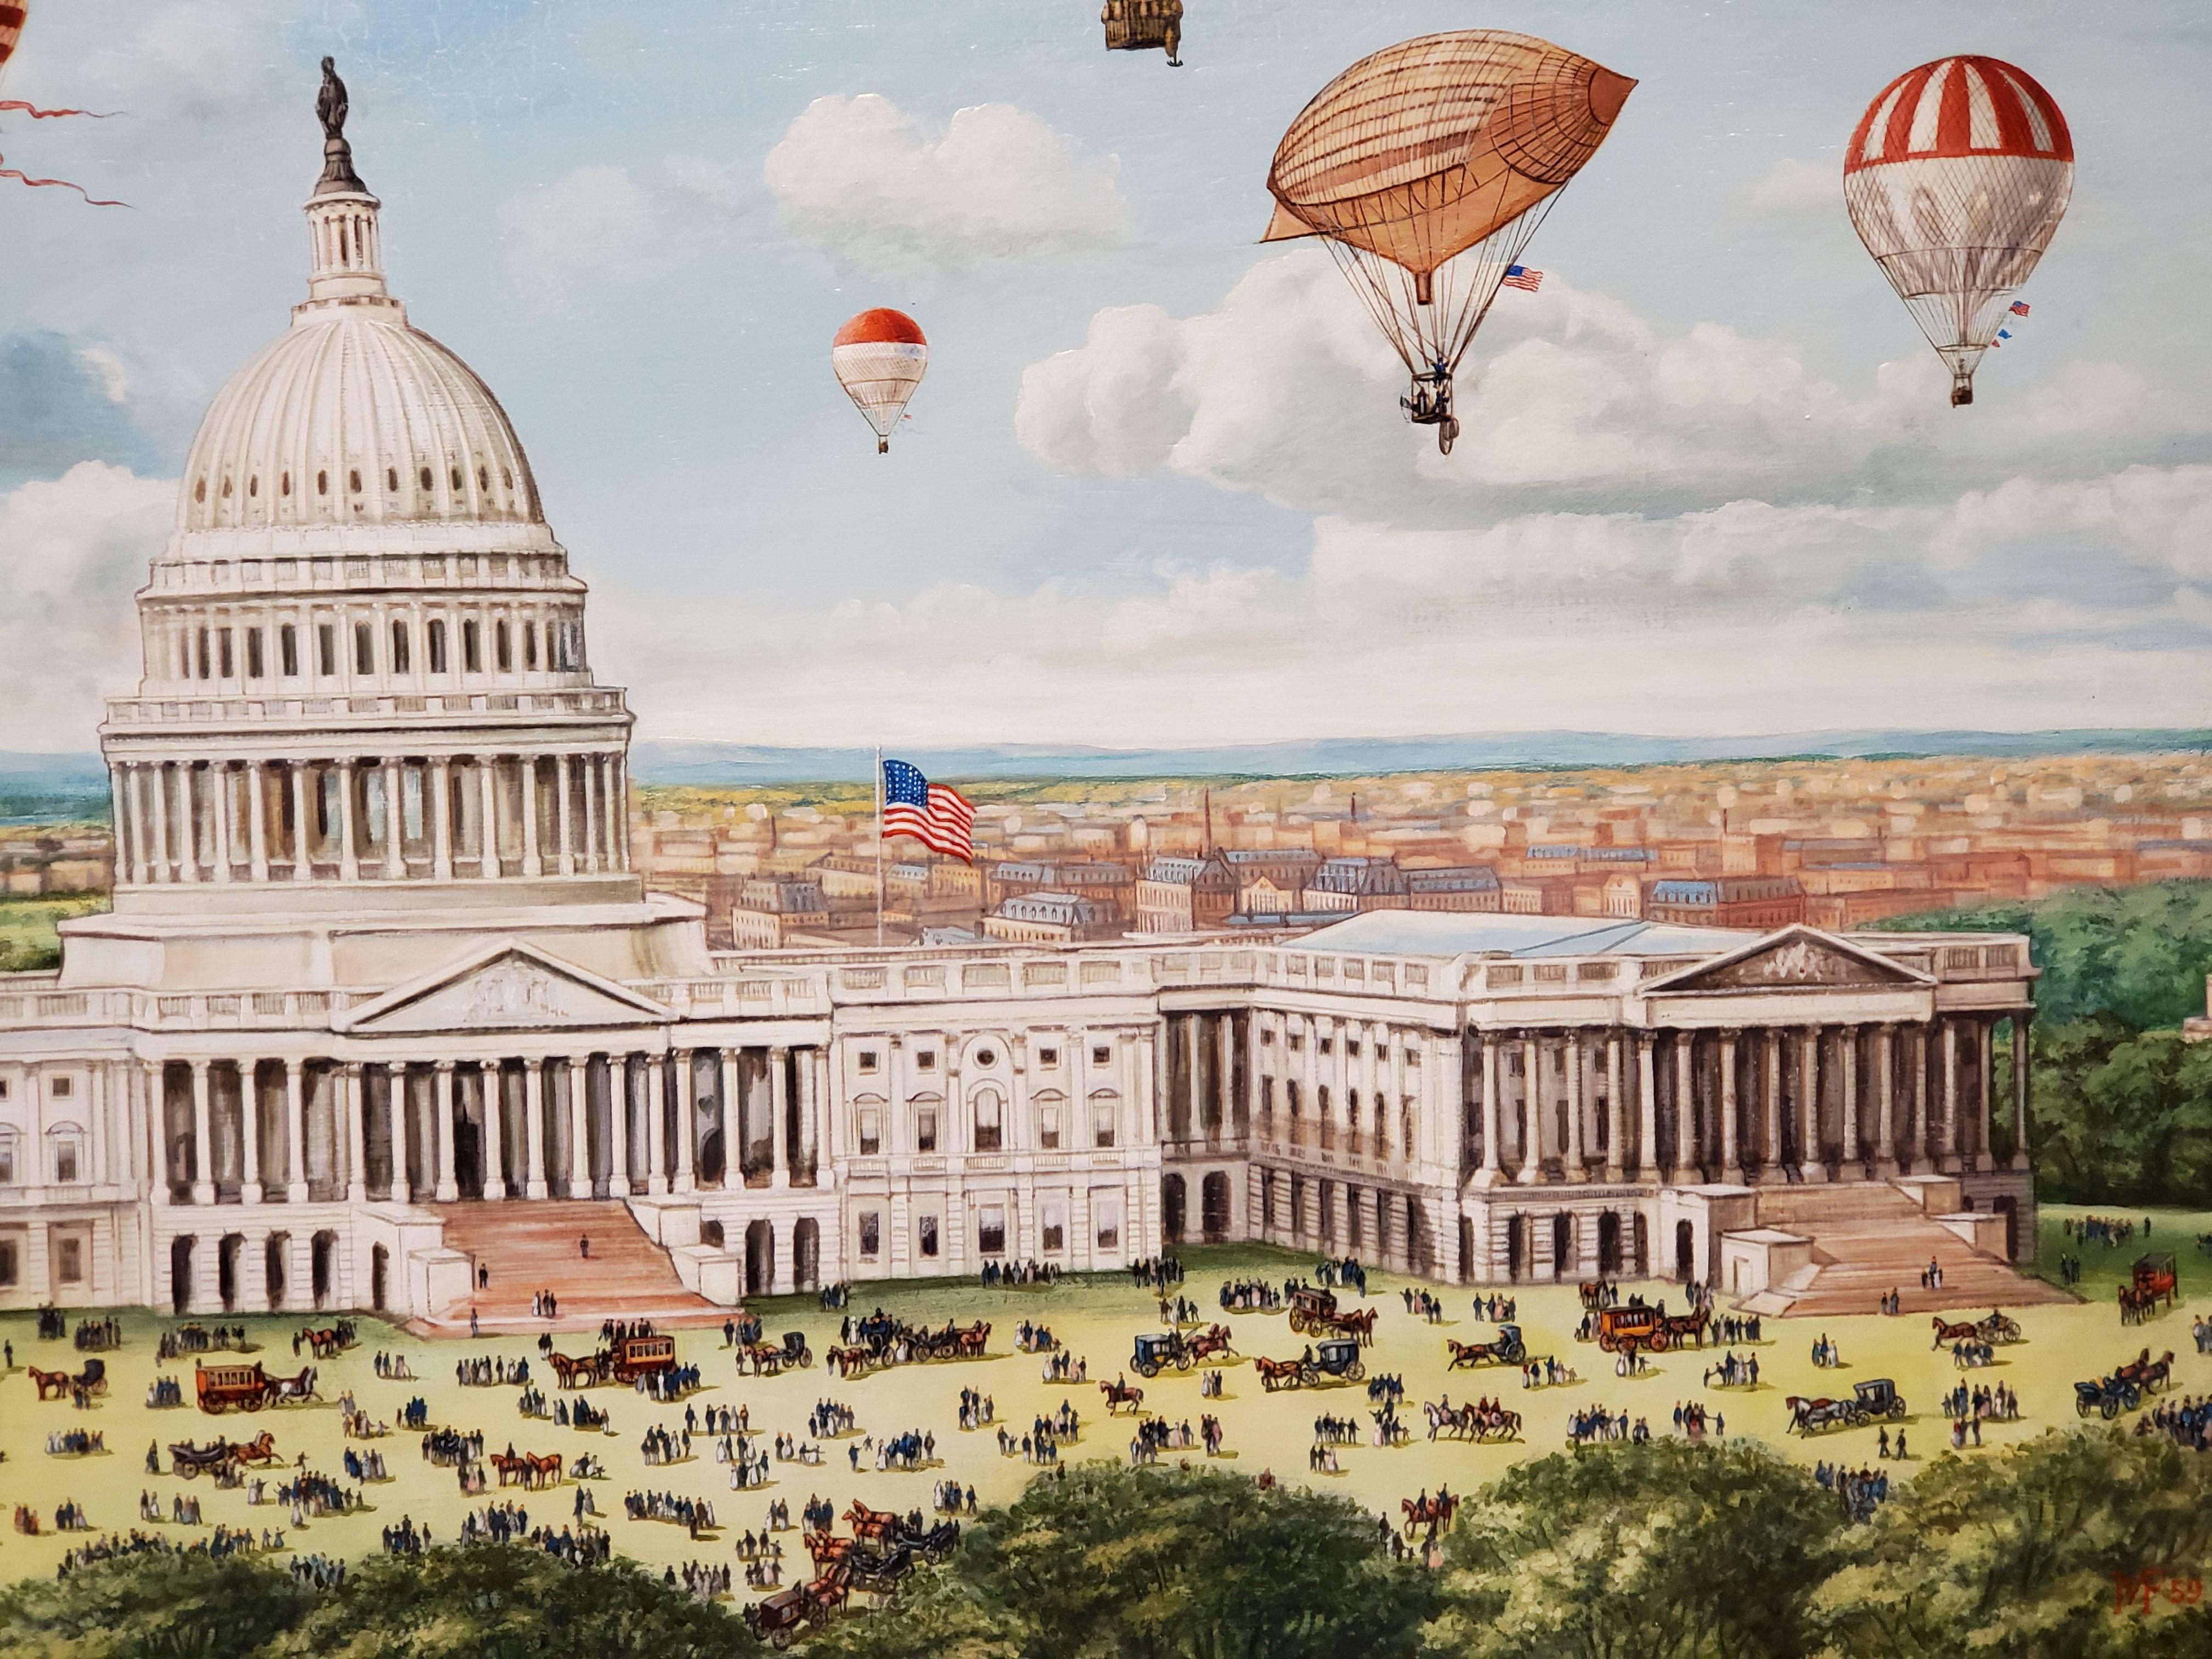 Grand 19th century Aeronautical Spectacular Over the US Capitol by Morris Flight 5